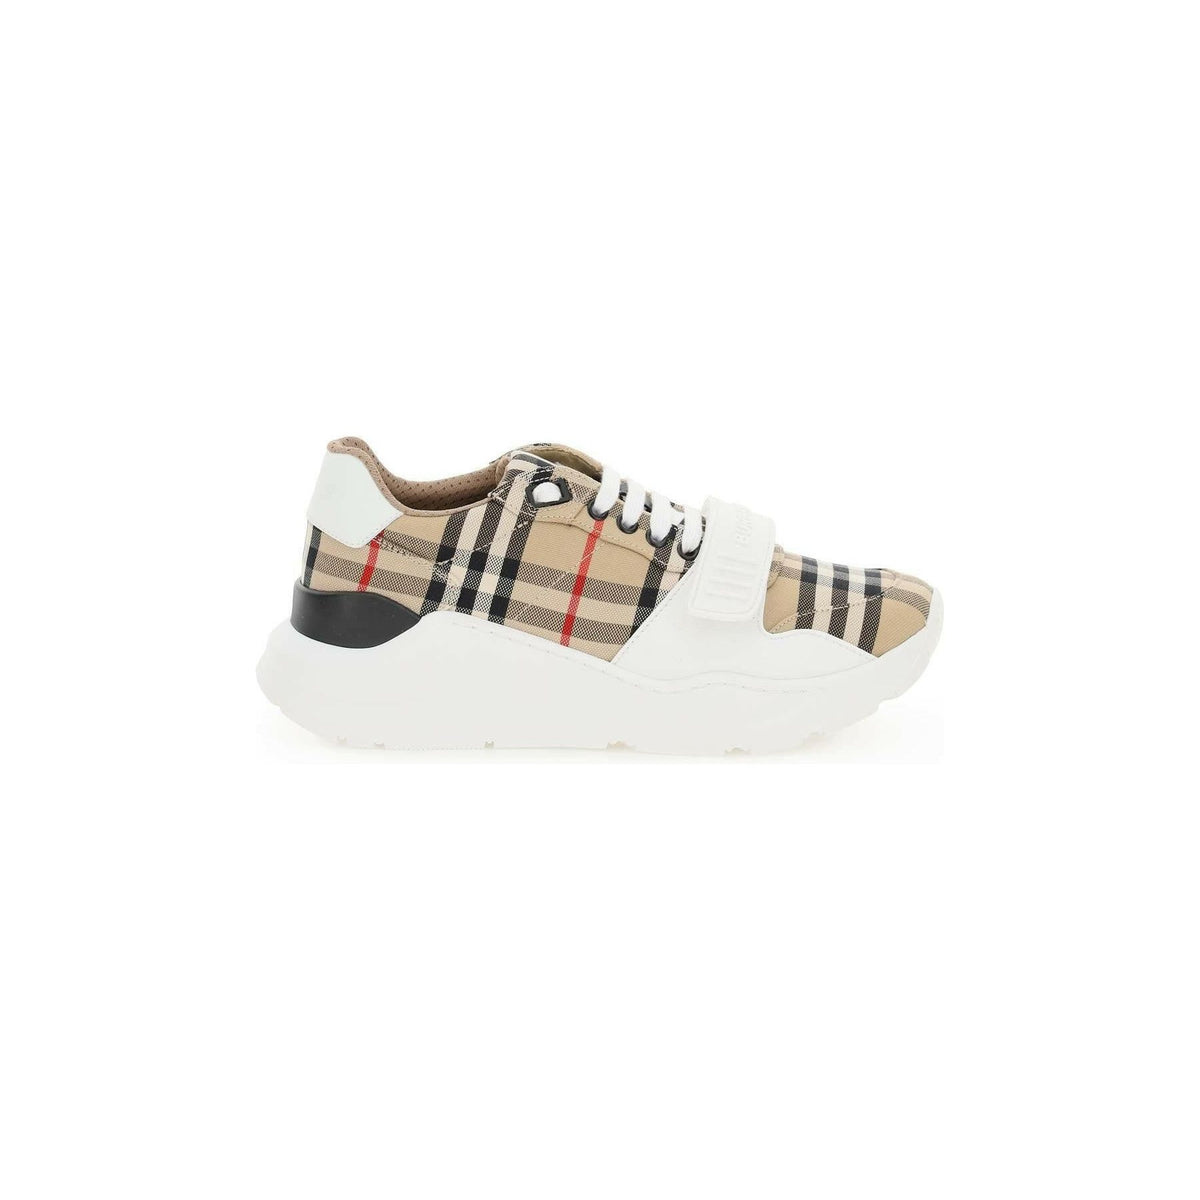 BURBERRY - Archive Beige Regis Check, Suede and Leather Sneakers - JOHN JULIA